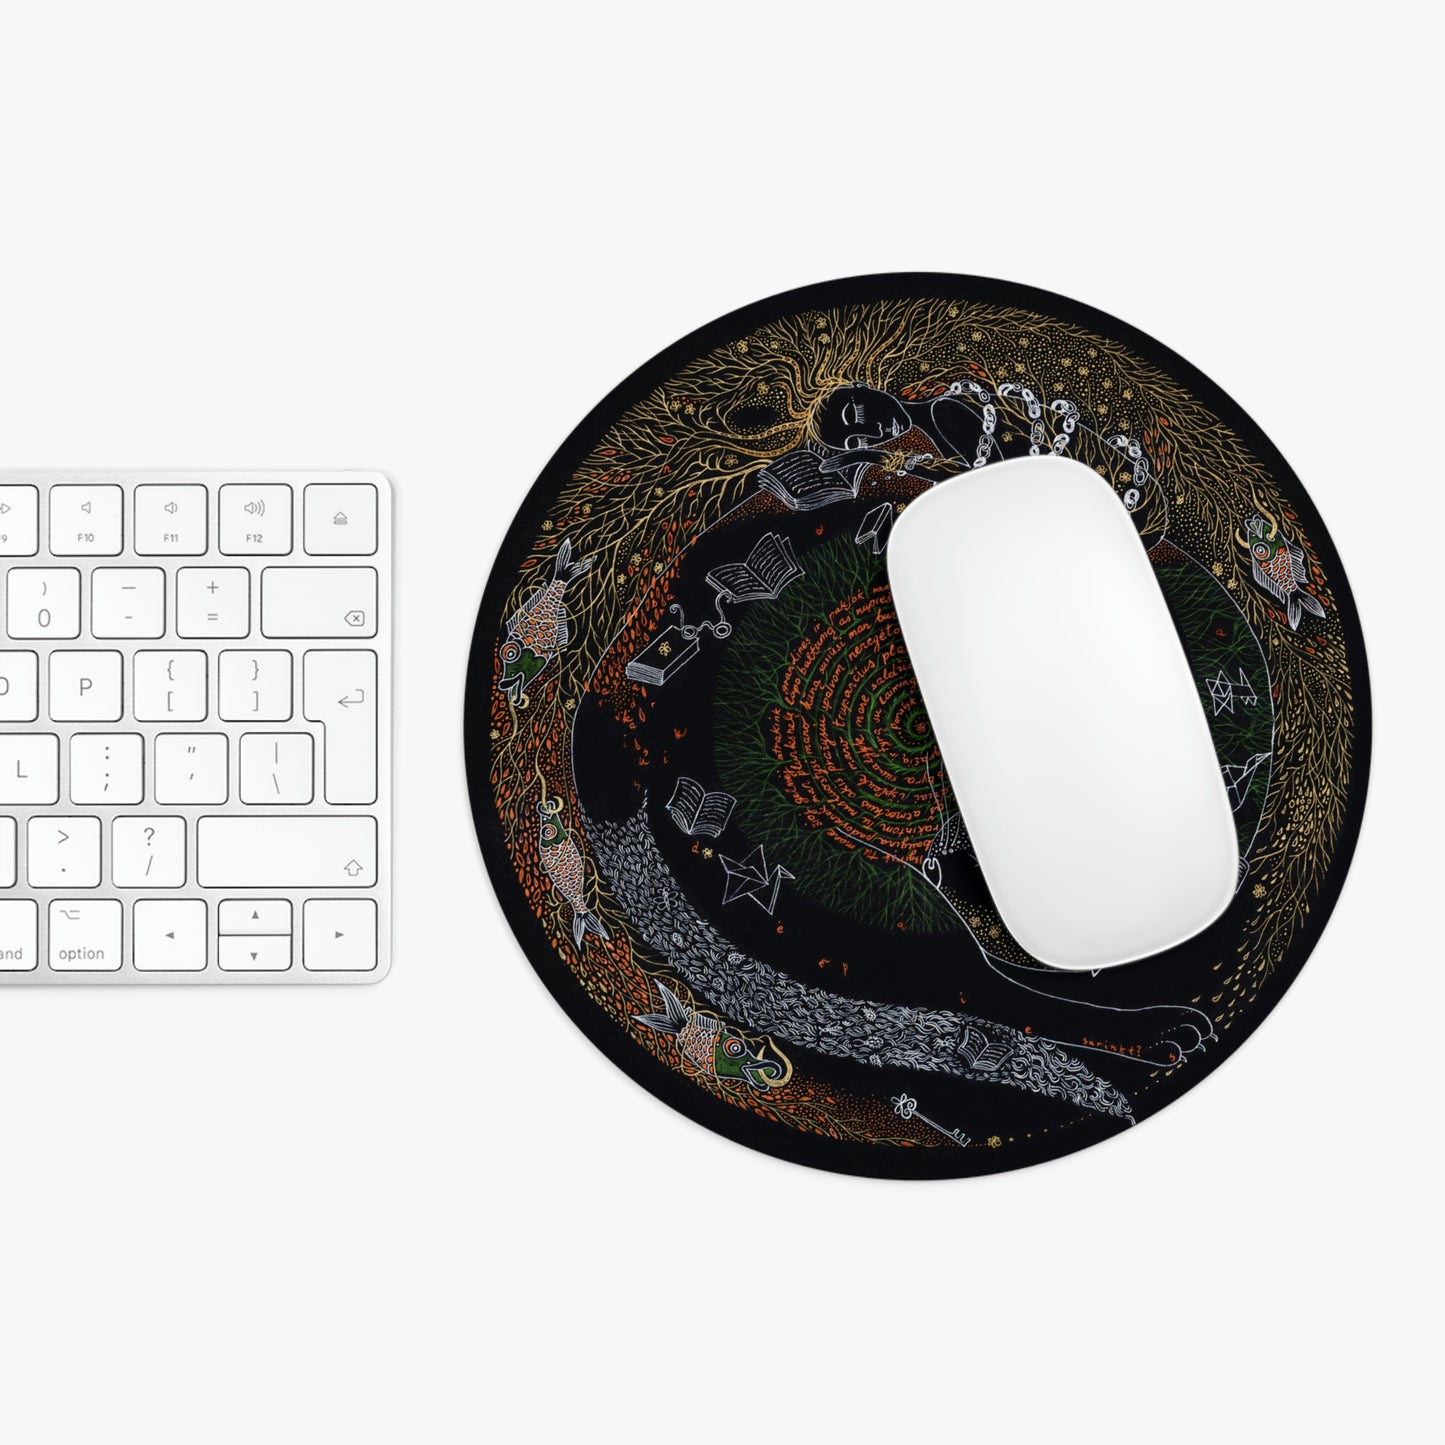 Chinese Zodiac Sign Mouse Pad (Cat)